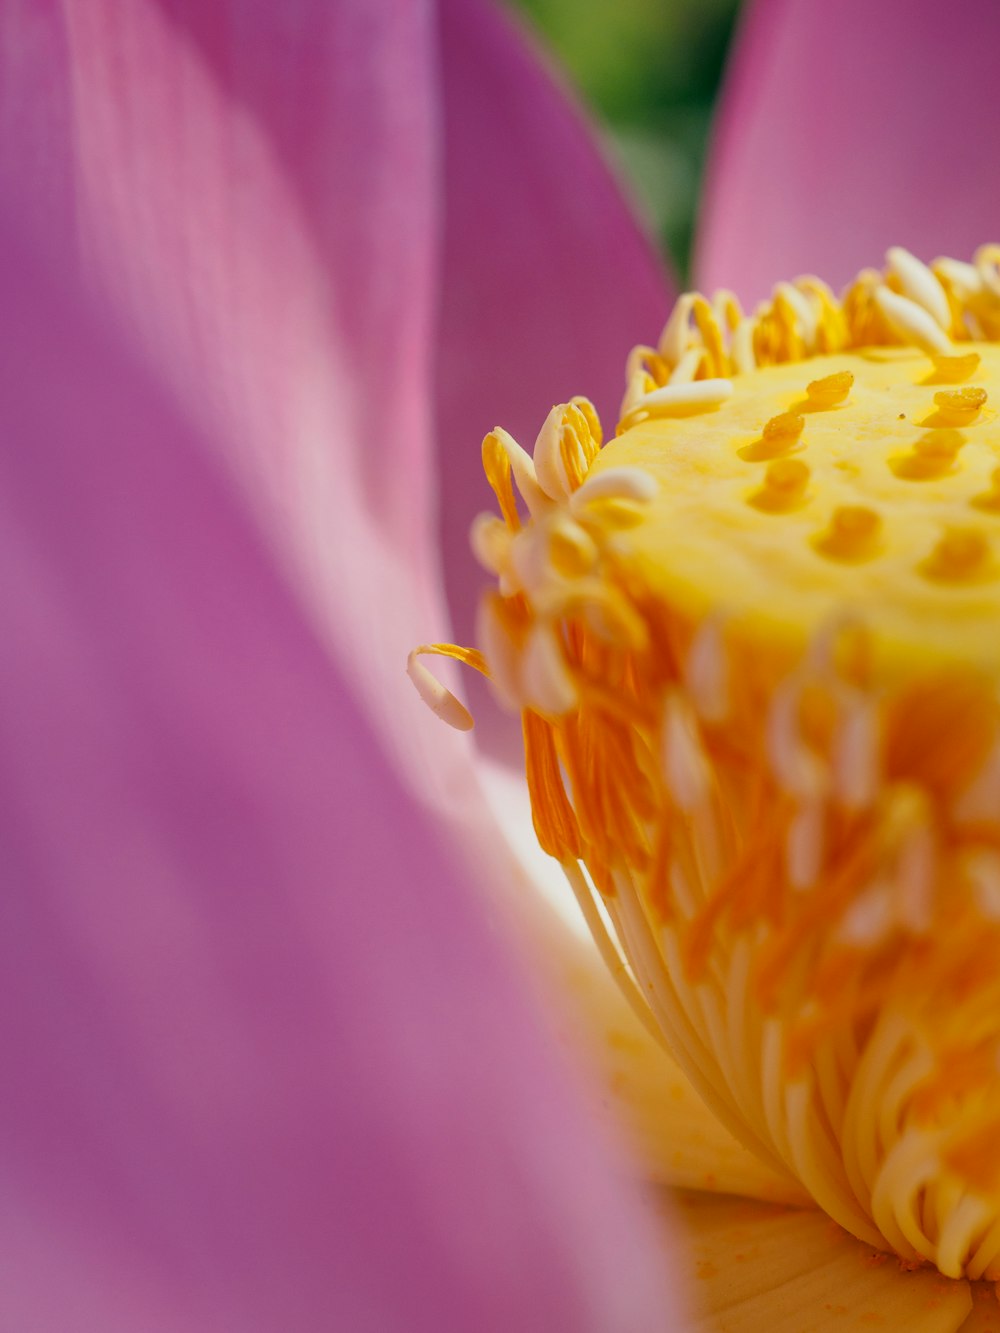 a close up of the center of a flower